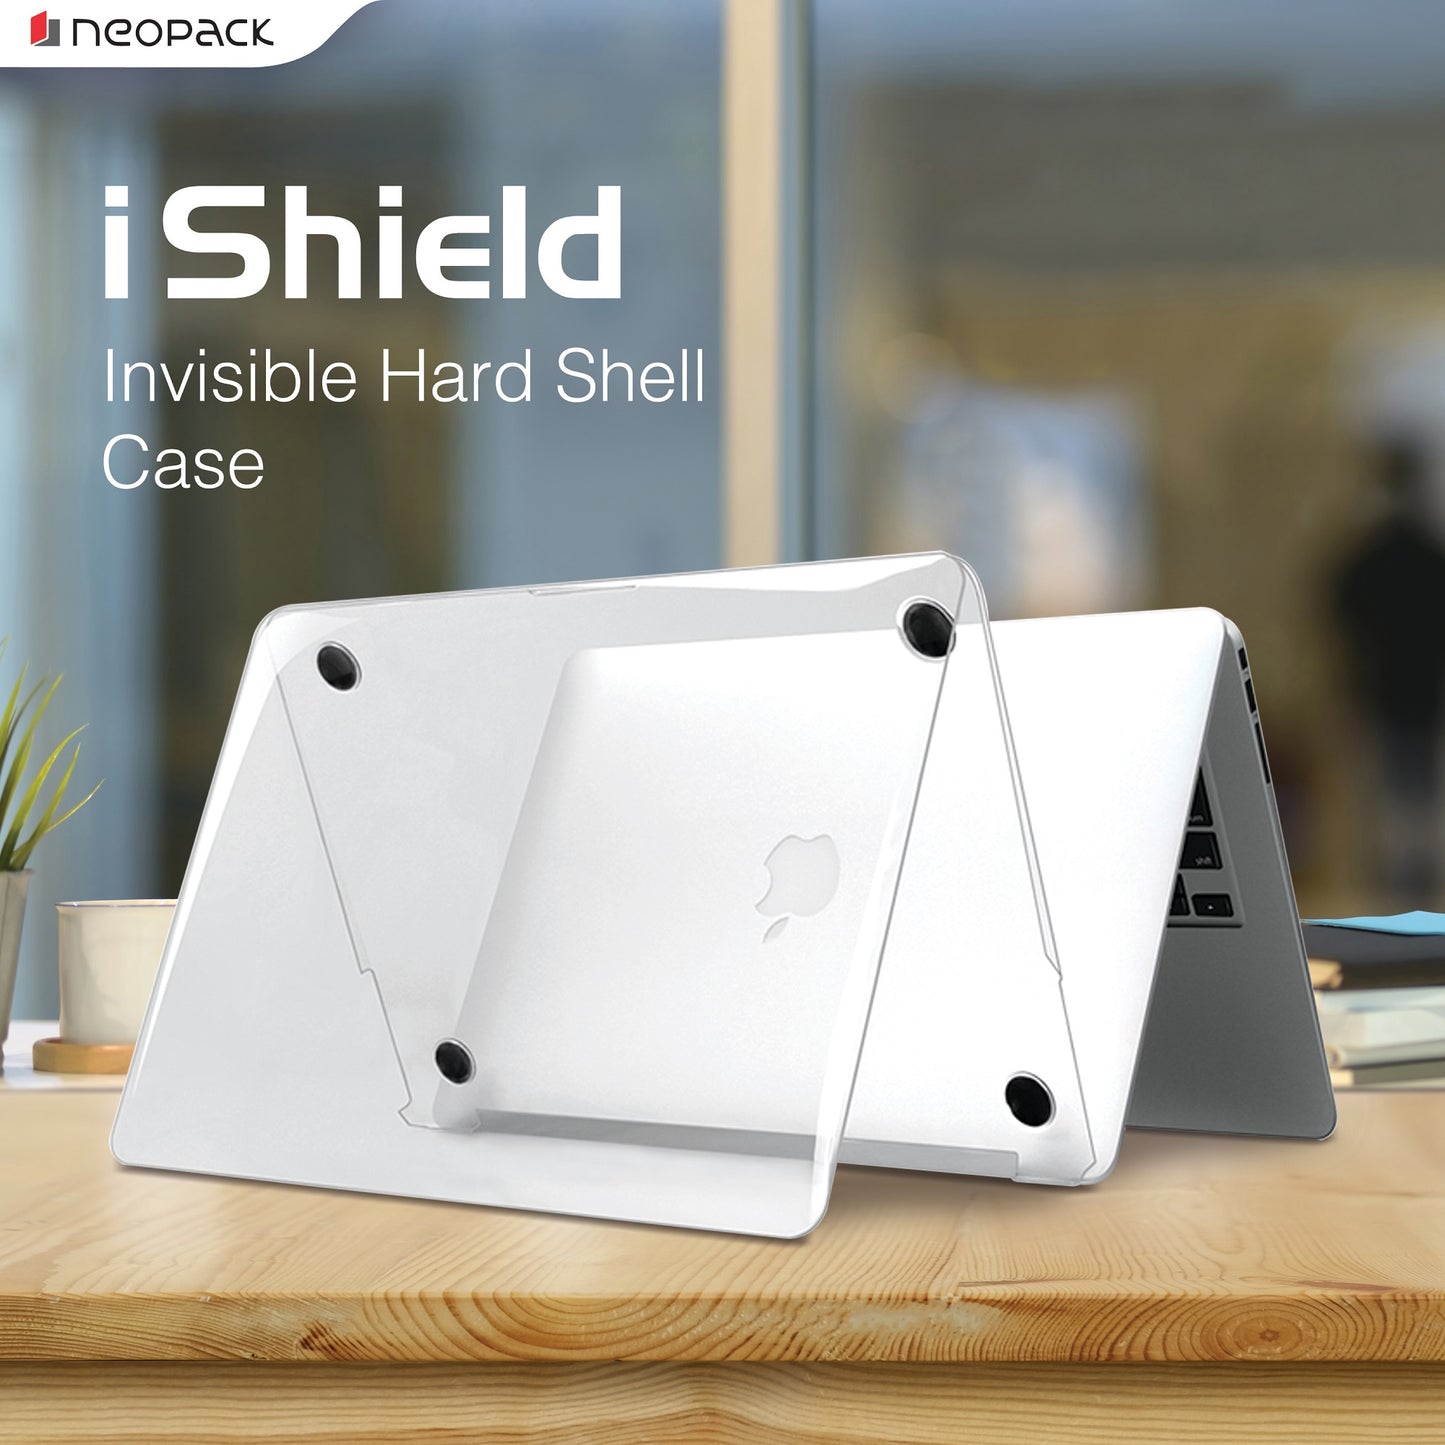 Neopack iShield Crystal Clear Shell Case for MacBook Air 13-inch 2018 Model - Clear